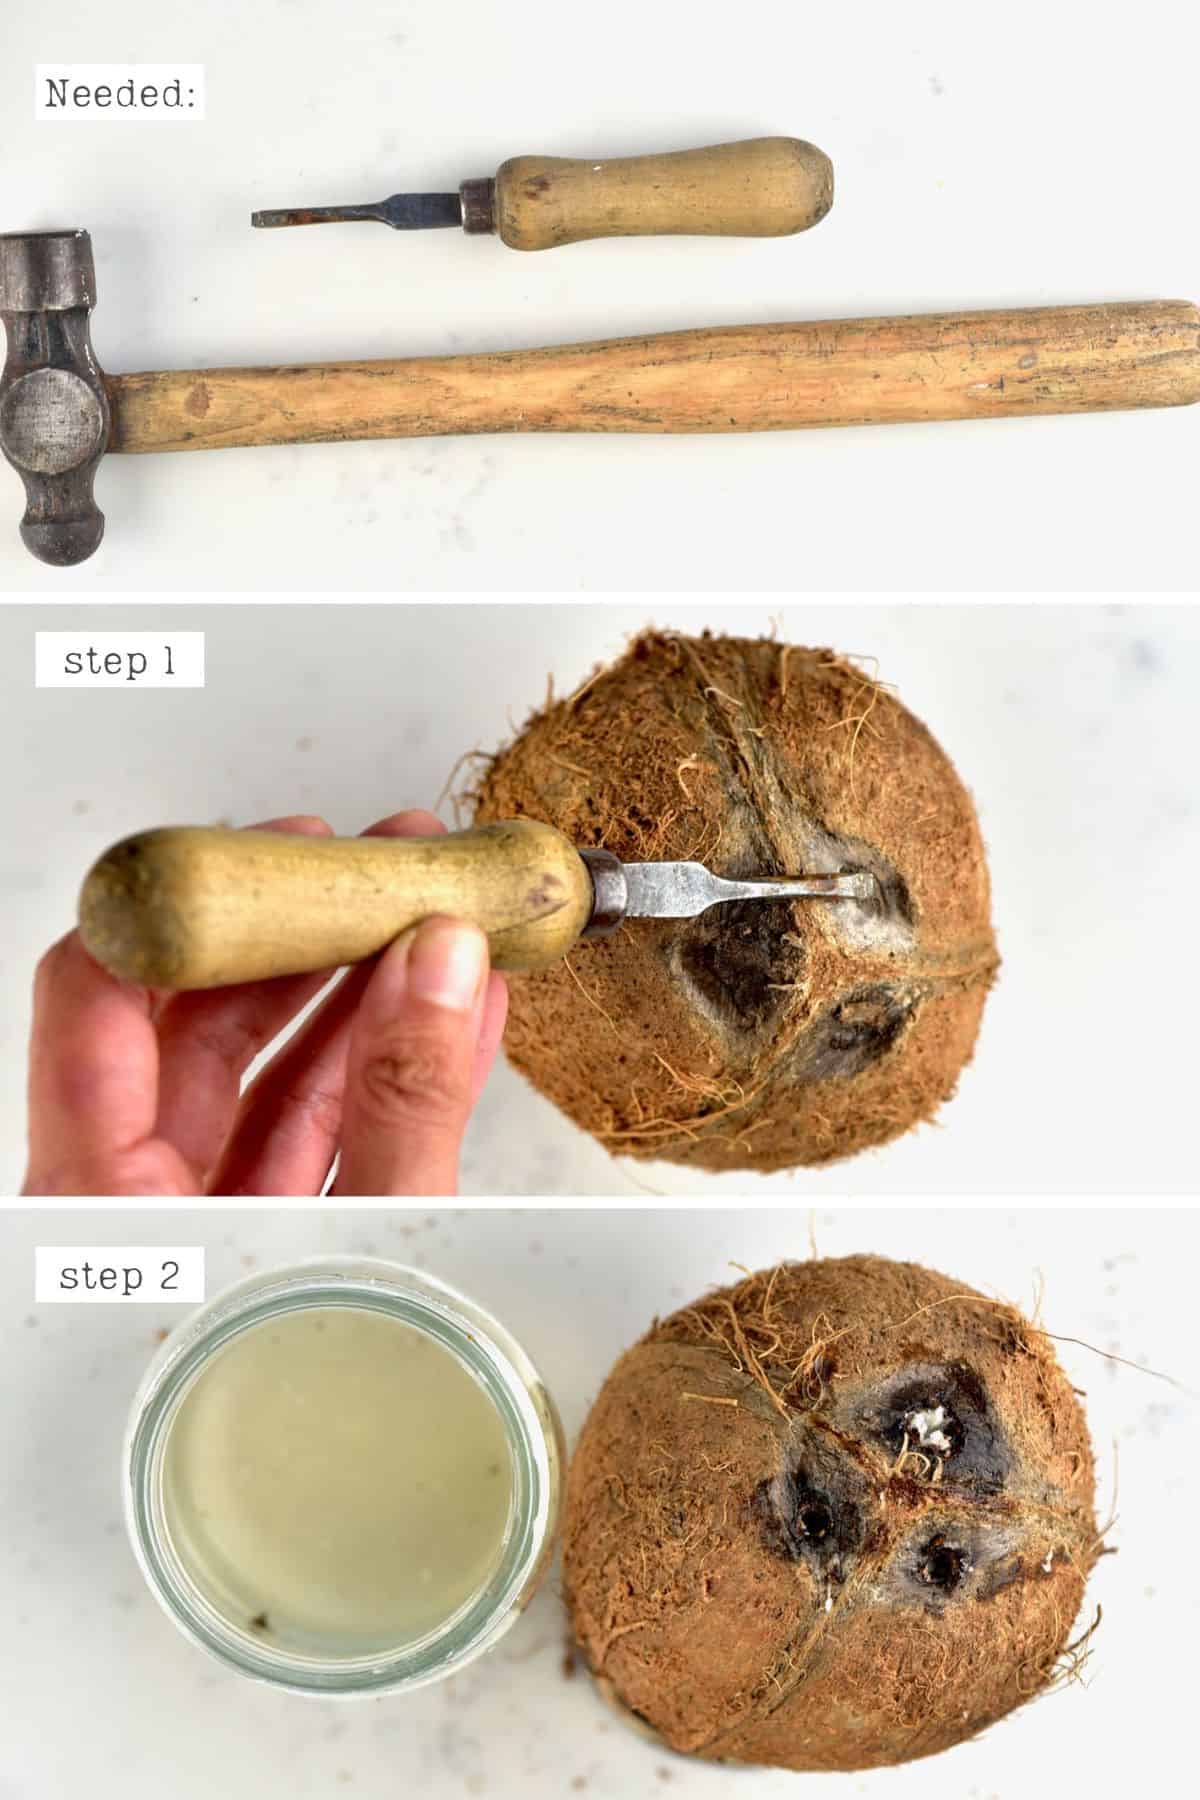 Steps for draining coconut water